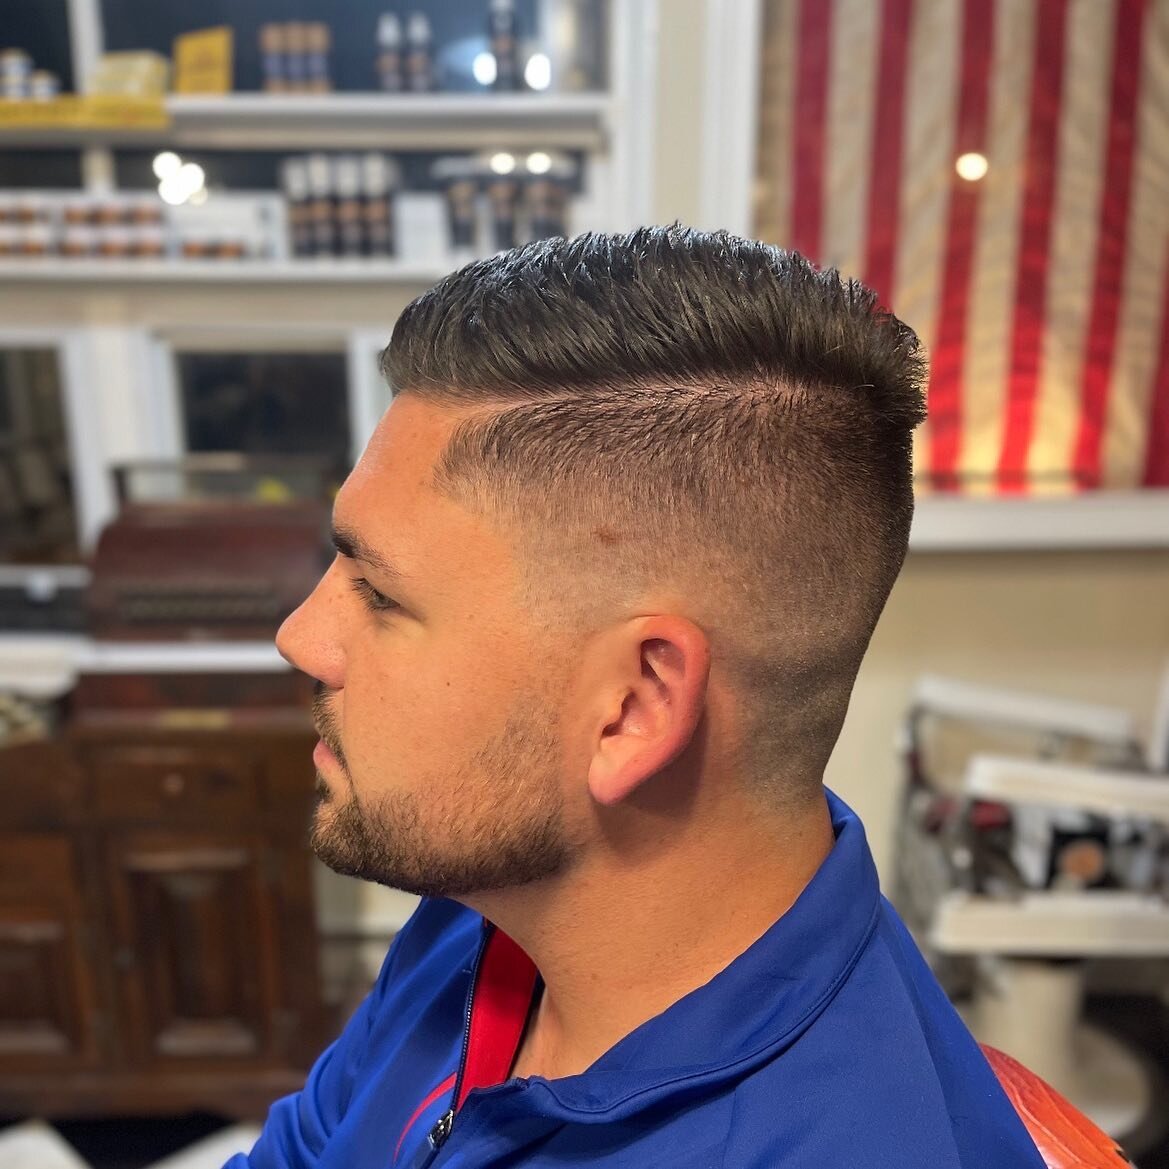 If you read this, drop a 🙌🏼 in the comments. 

#BestHaircutEver #PhillysBestBarber #PhillyBarber #PhillyBarbers #PhillyBarbershop #Philly #phillyhair #Philadelphia #barbers #barbering #barberlove #traditionalbarber #barber-life  #menshair #100kbarb